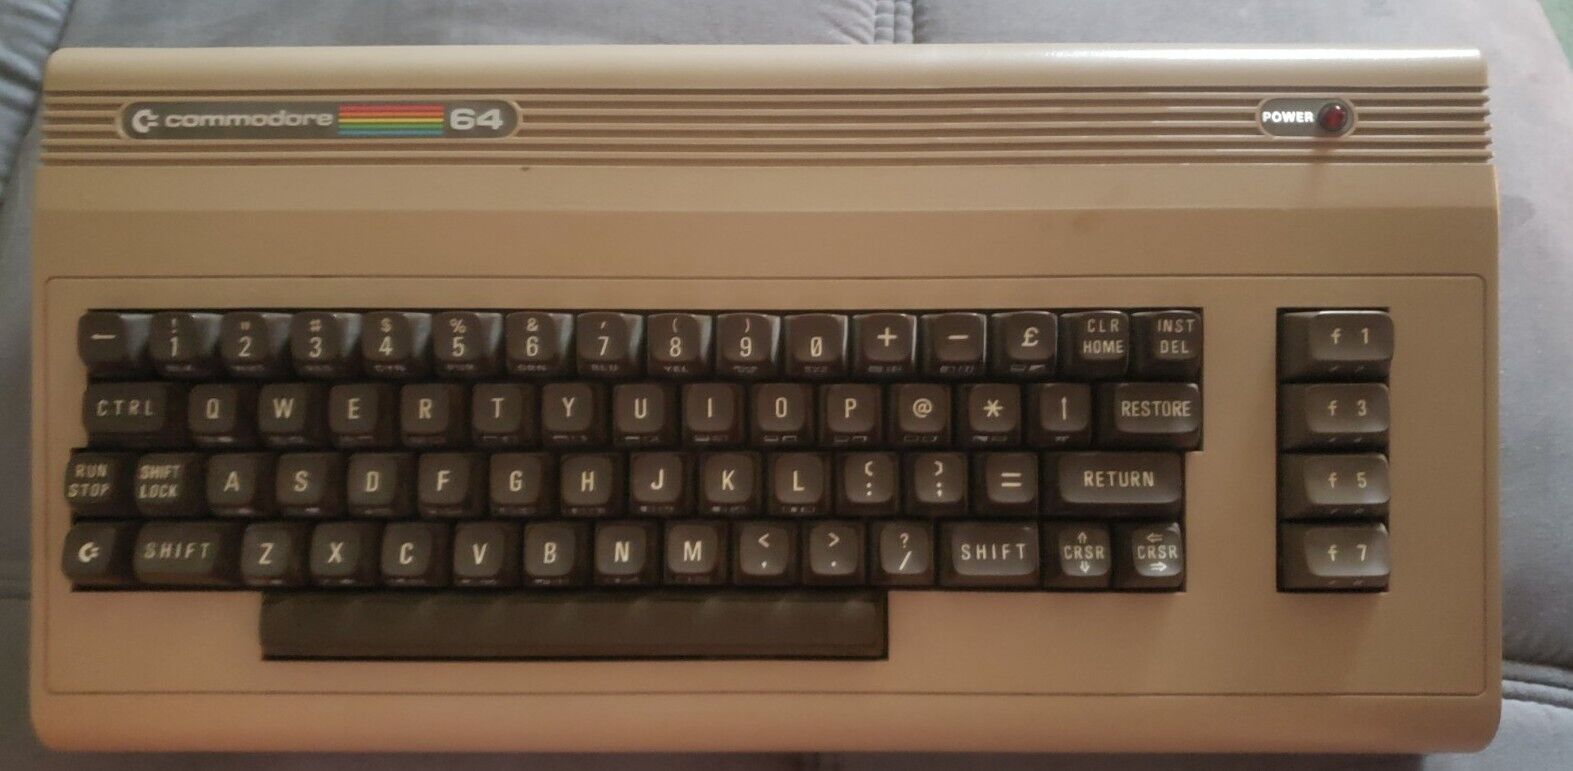 Commodore 64 computer Early Model